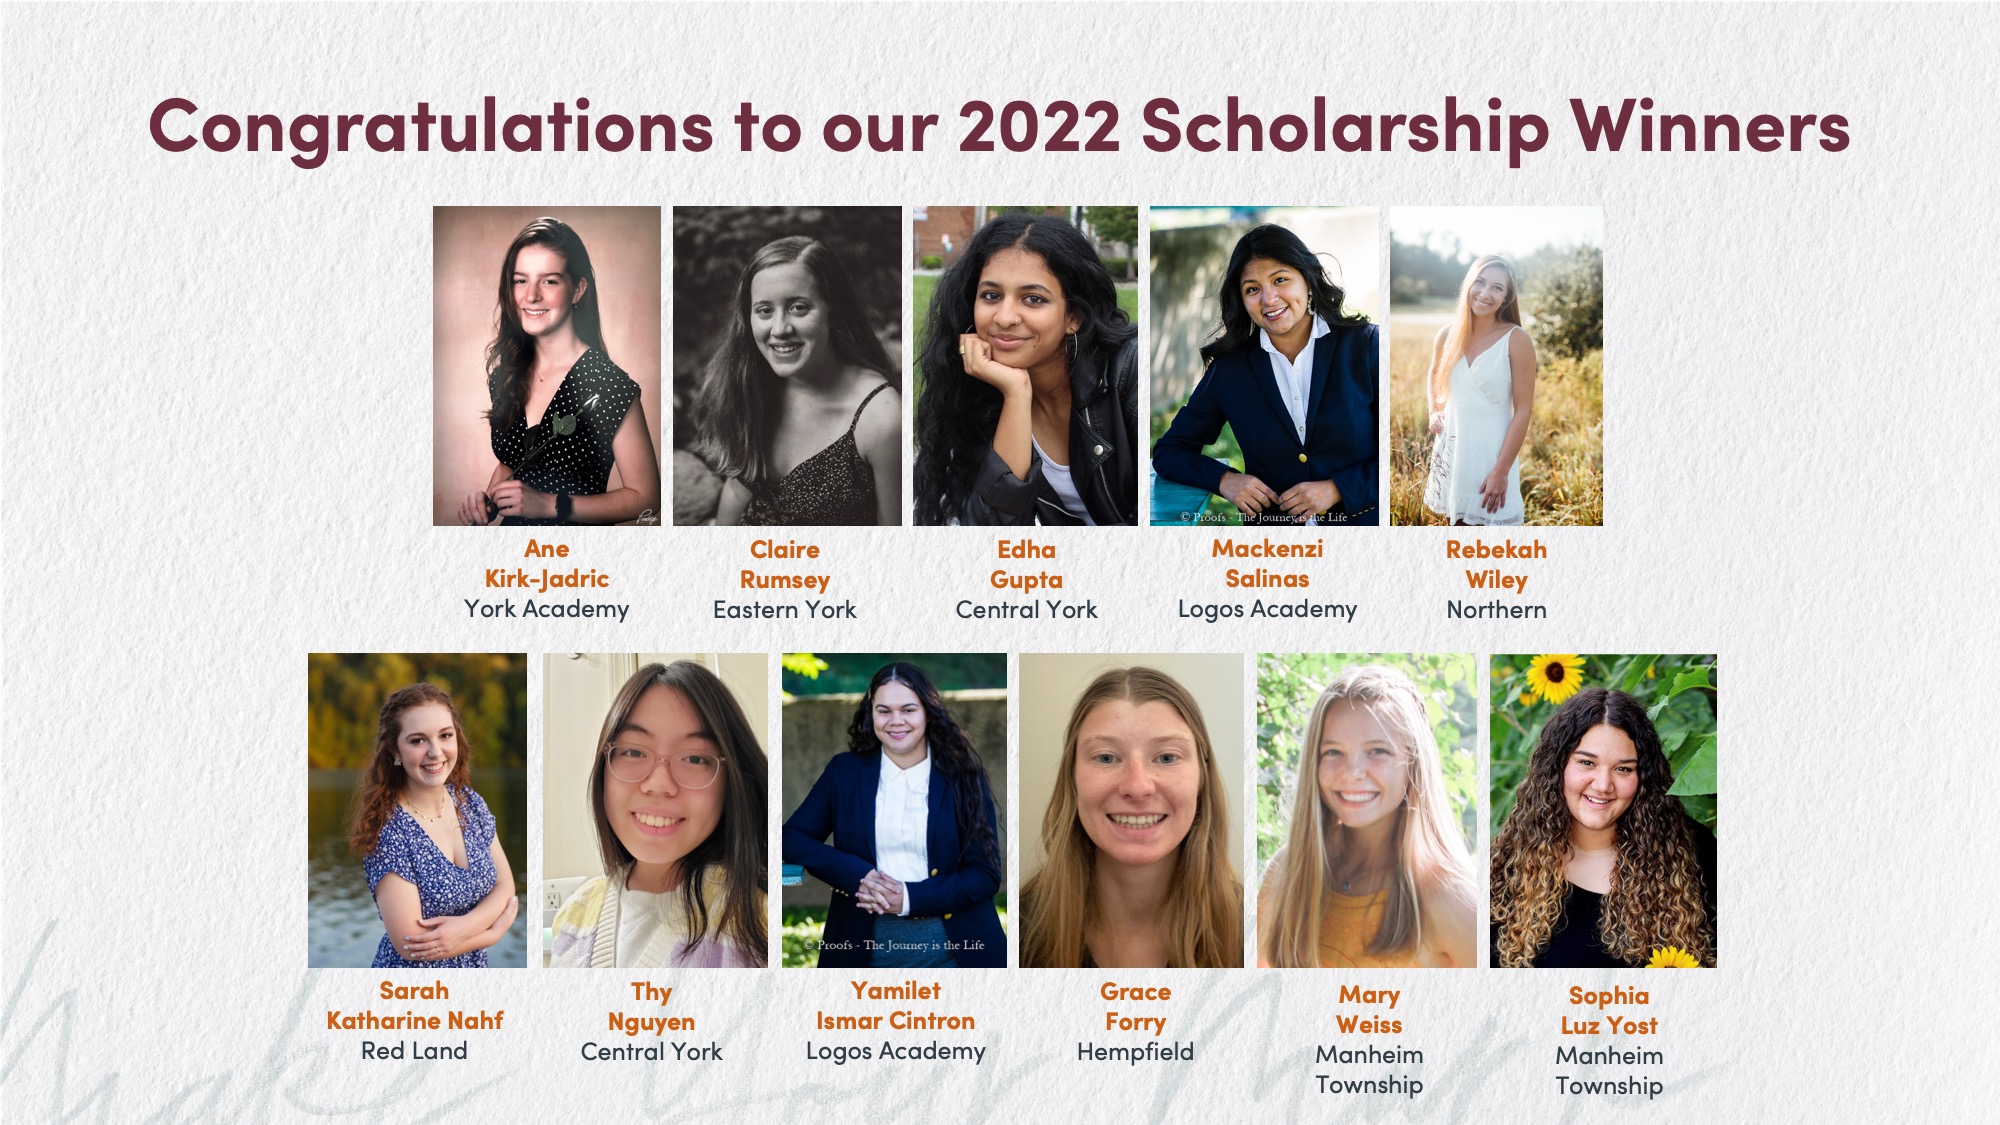 Her Traditions 2022 Scholarship Winners